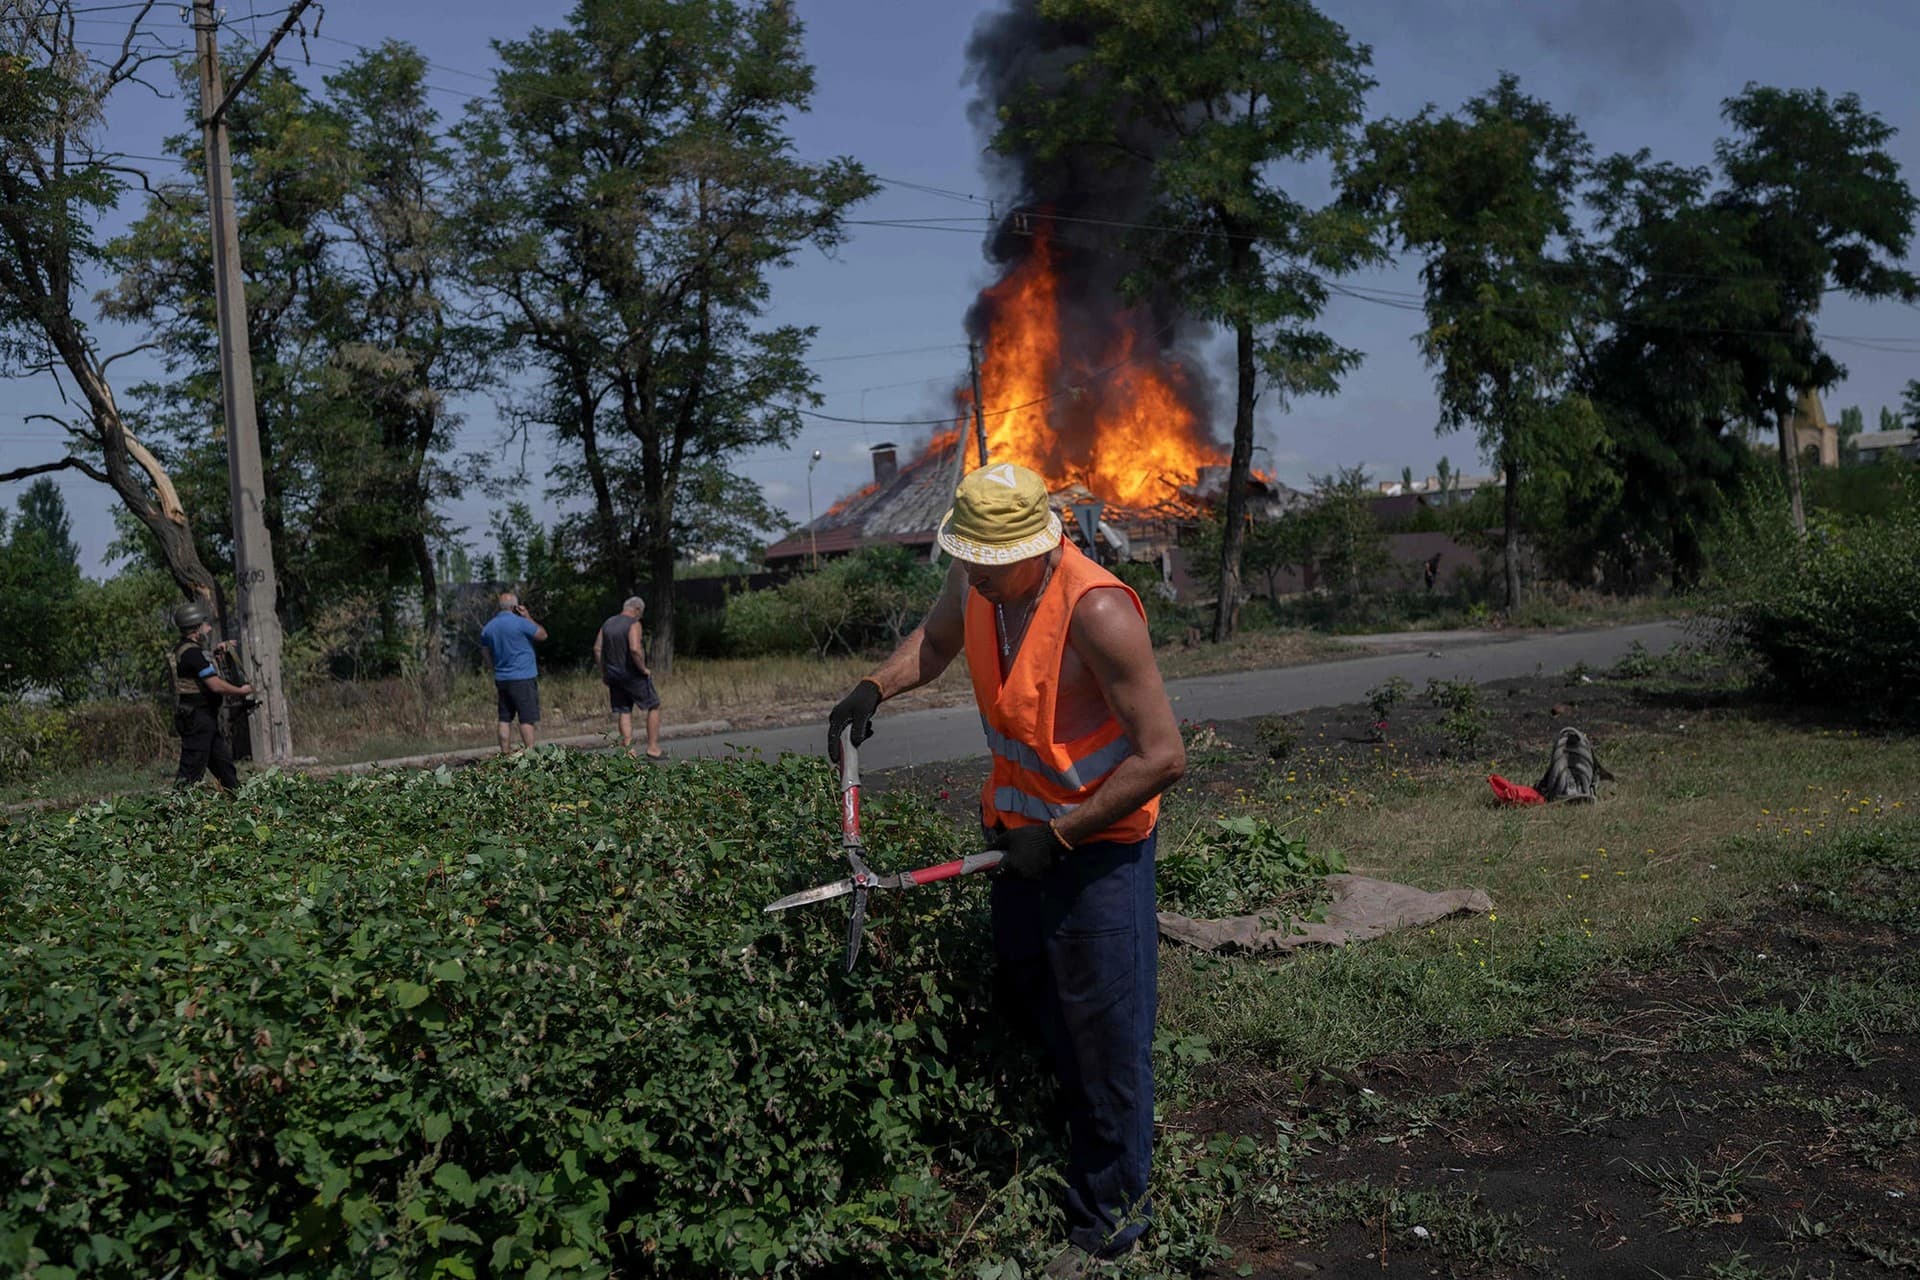 municipal worker trims hedges against the backdrop of a burning house in Bakhmut